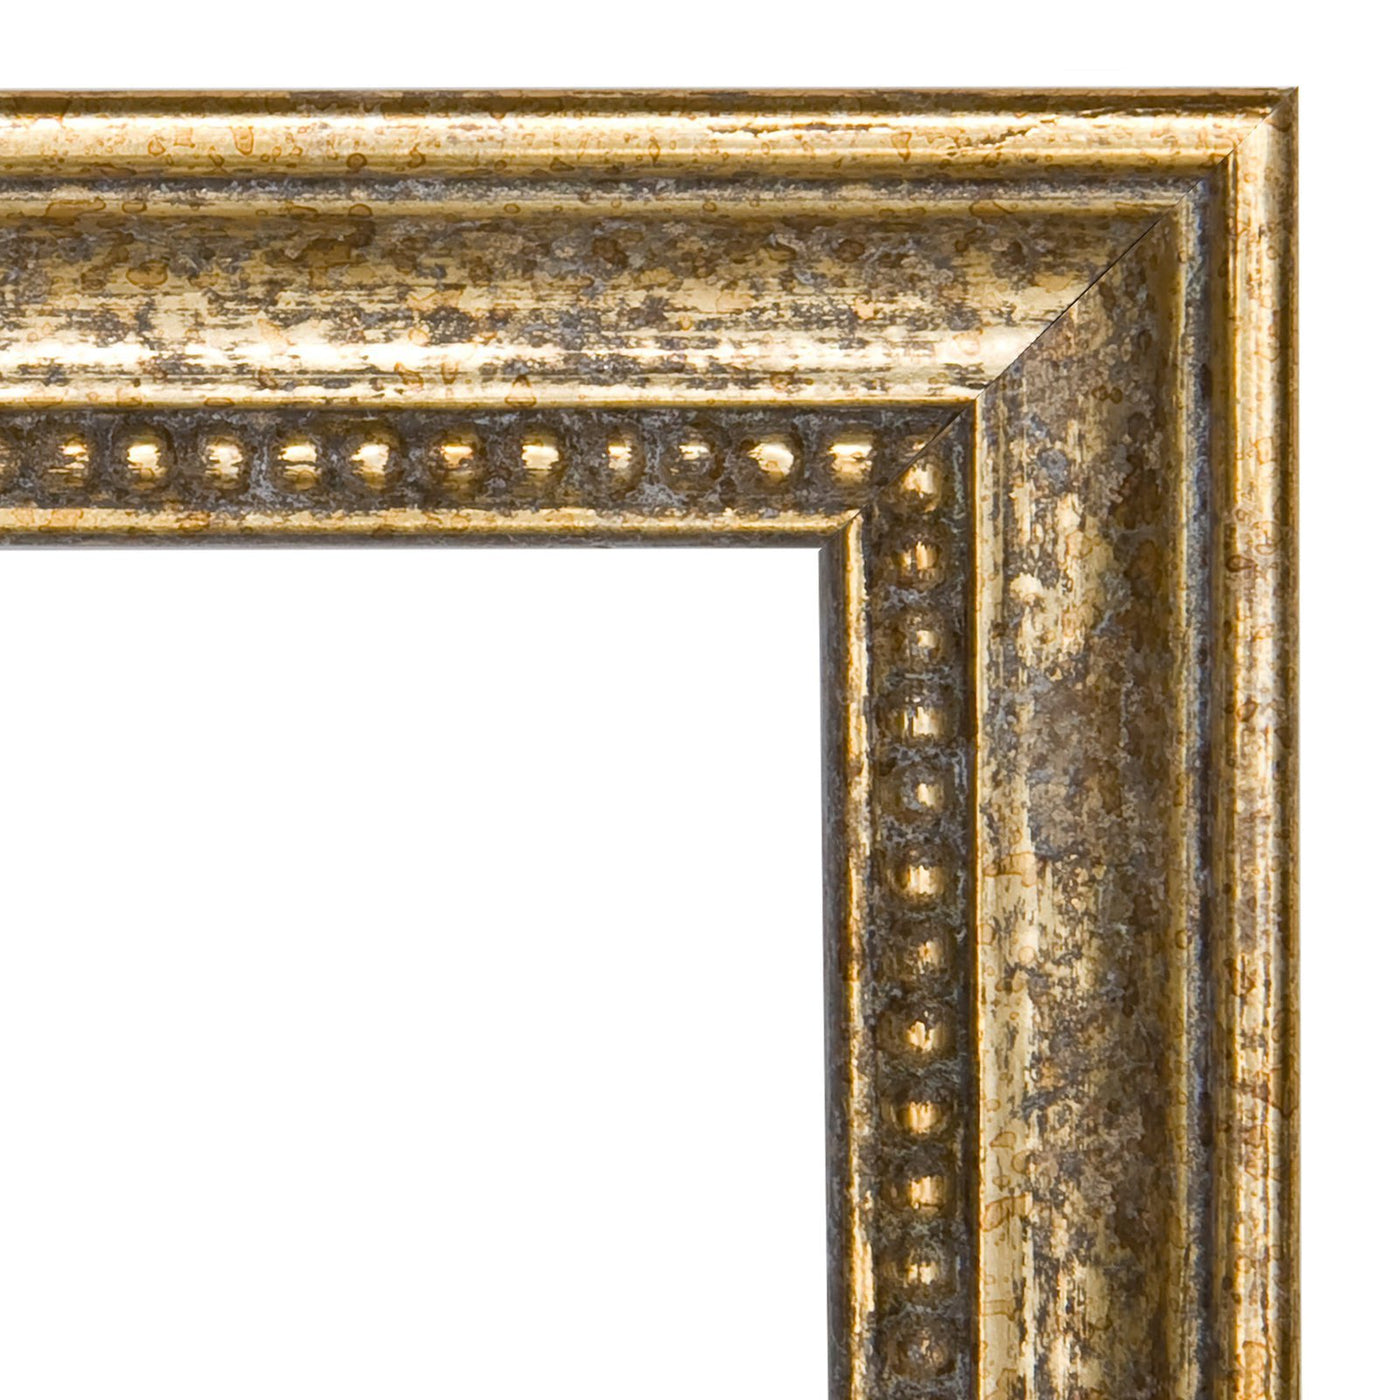 Single Gold Marbled Bead Photo Frame (detail)